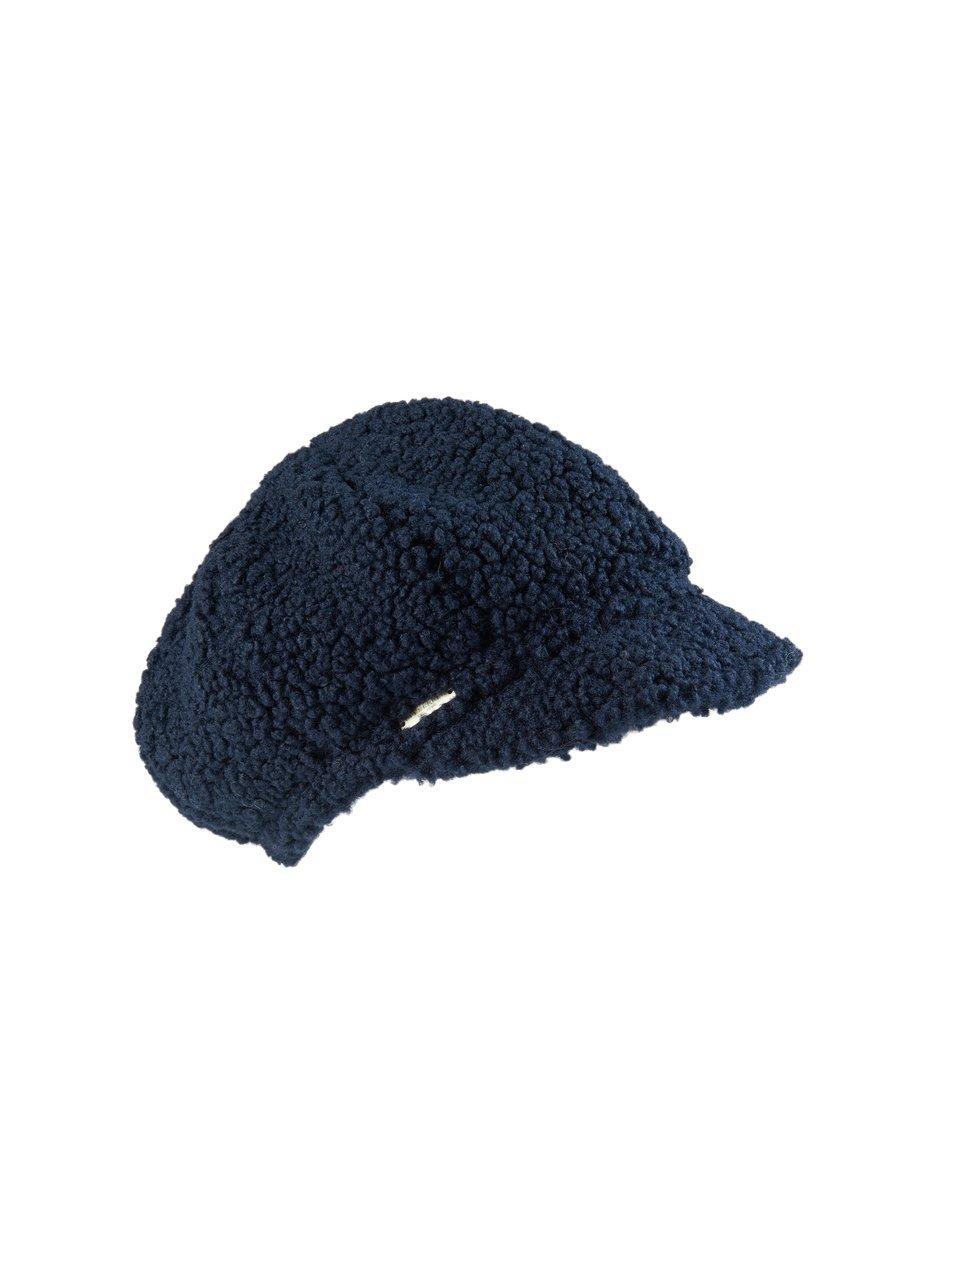 Image of Newsboy cap made of faux fur Seeberger blue